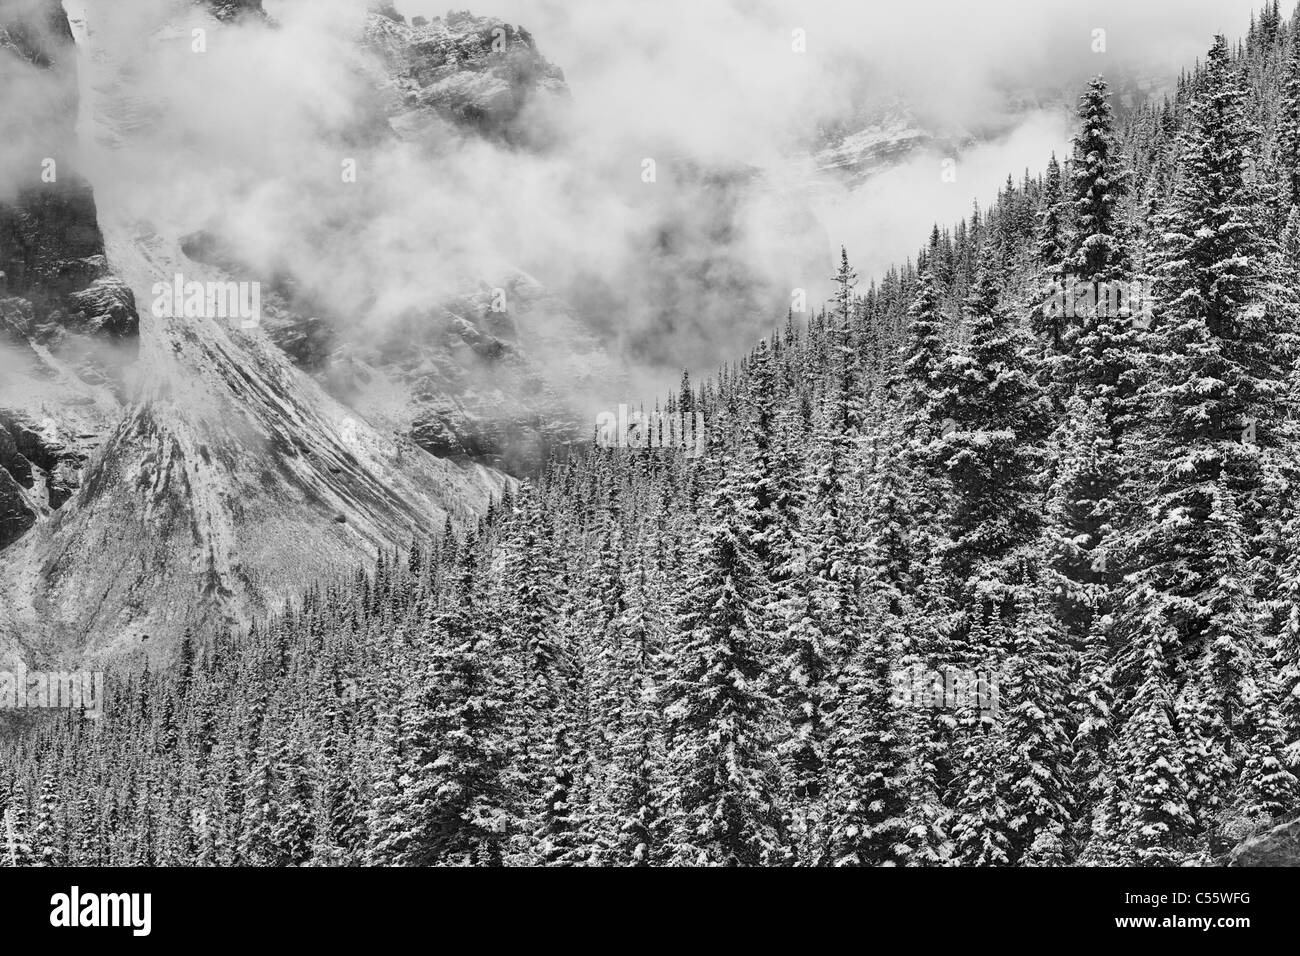 Snow covered coniferous trees in a forest, Valley Of The Ten Peaks, Banff National Park, Alberta, Canada Stock Photo